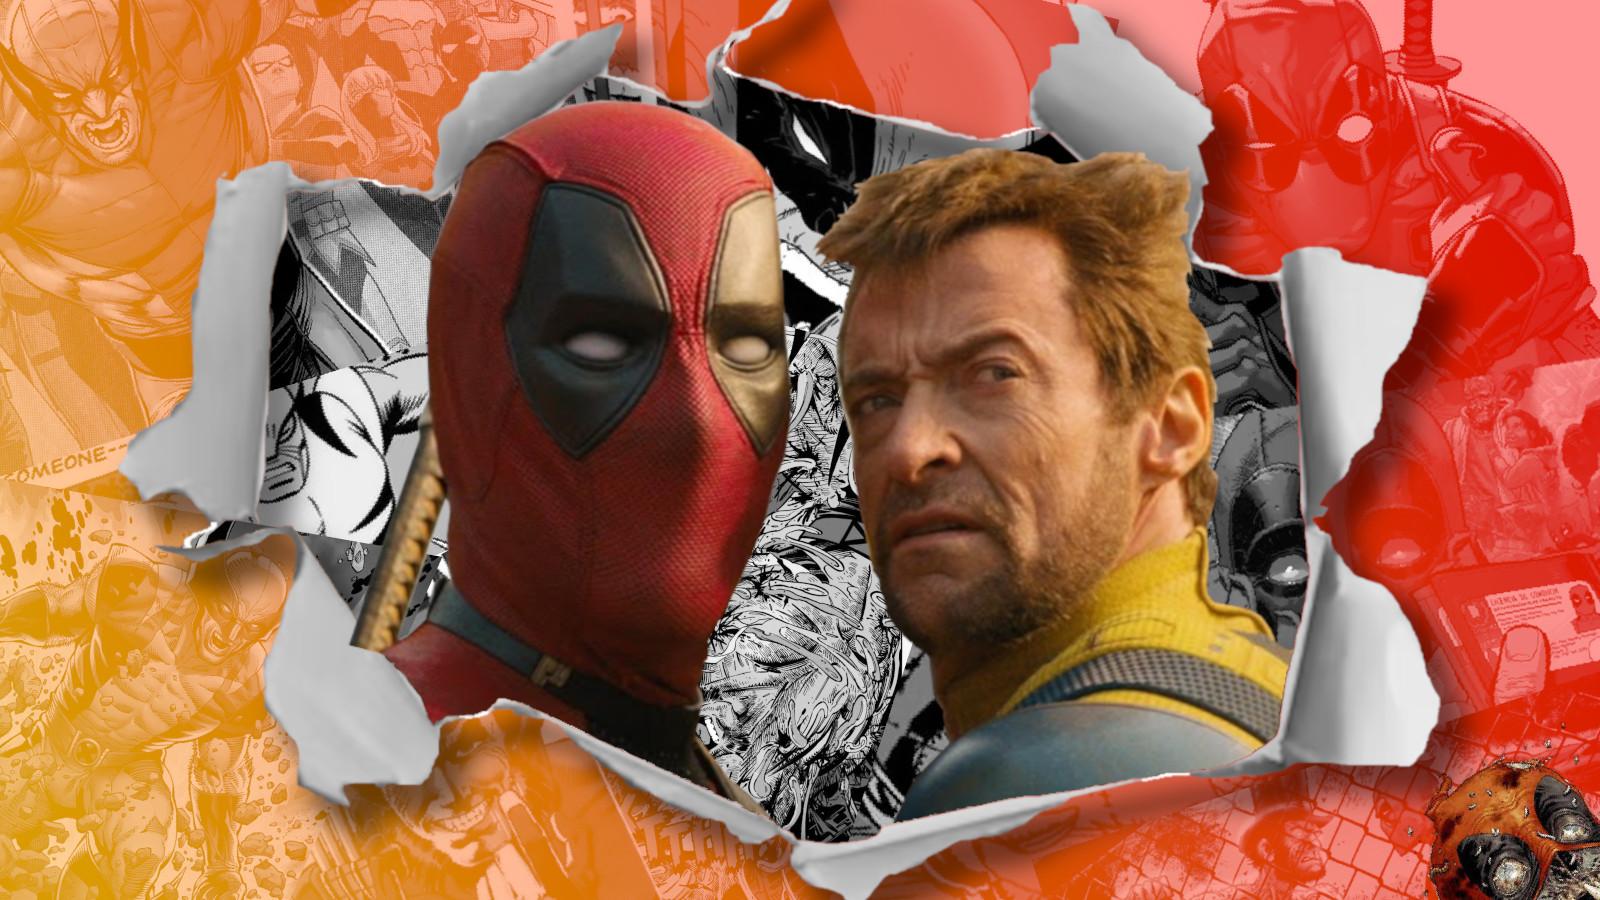 Logan and Wade from Deadpool & Wolverine lead out easter egg coverage.